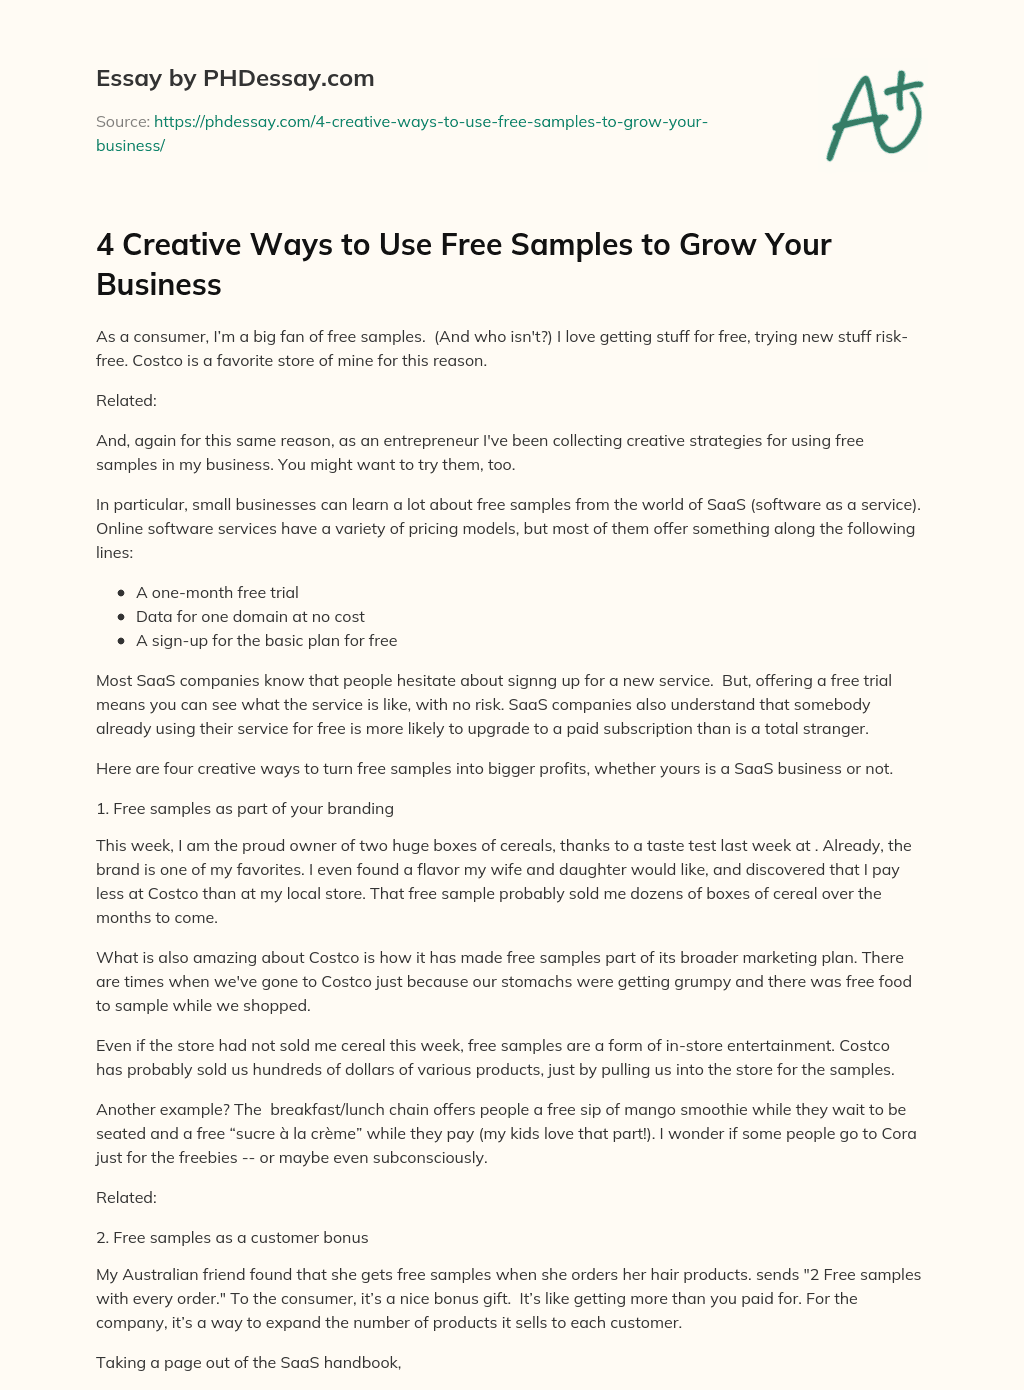 4 Creative Ways to Use Free Samples to Grow Your Business essay